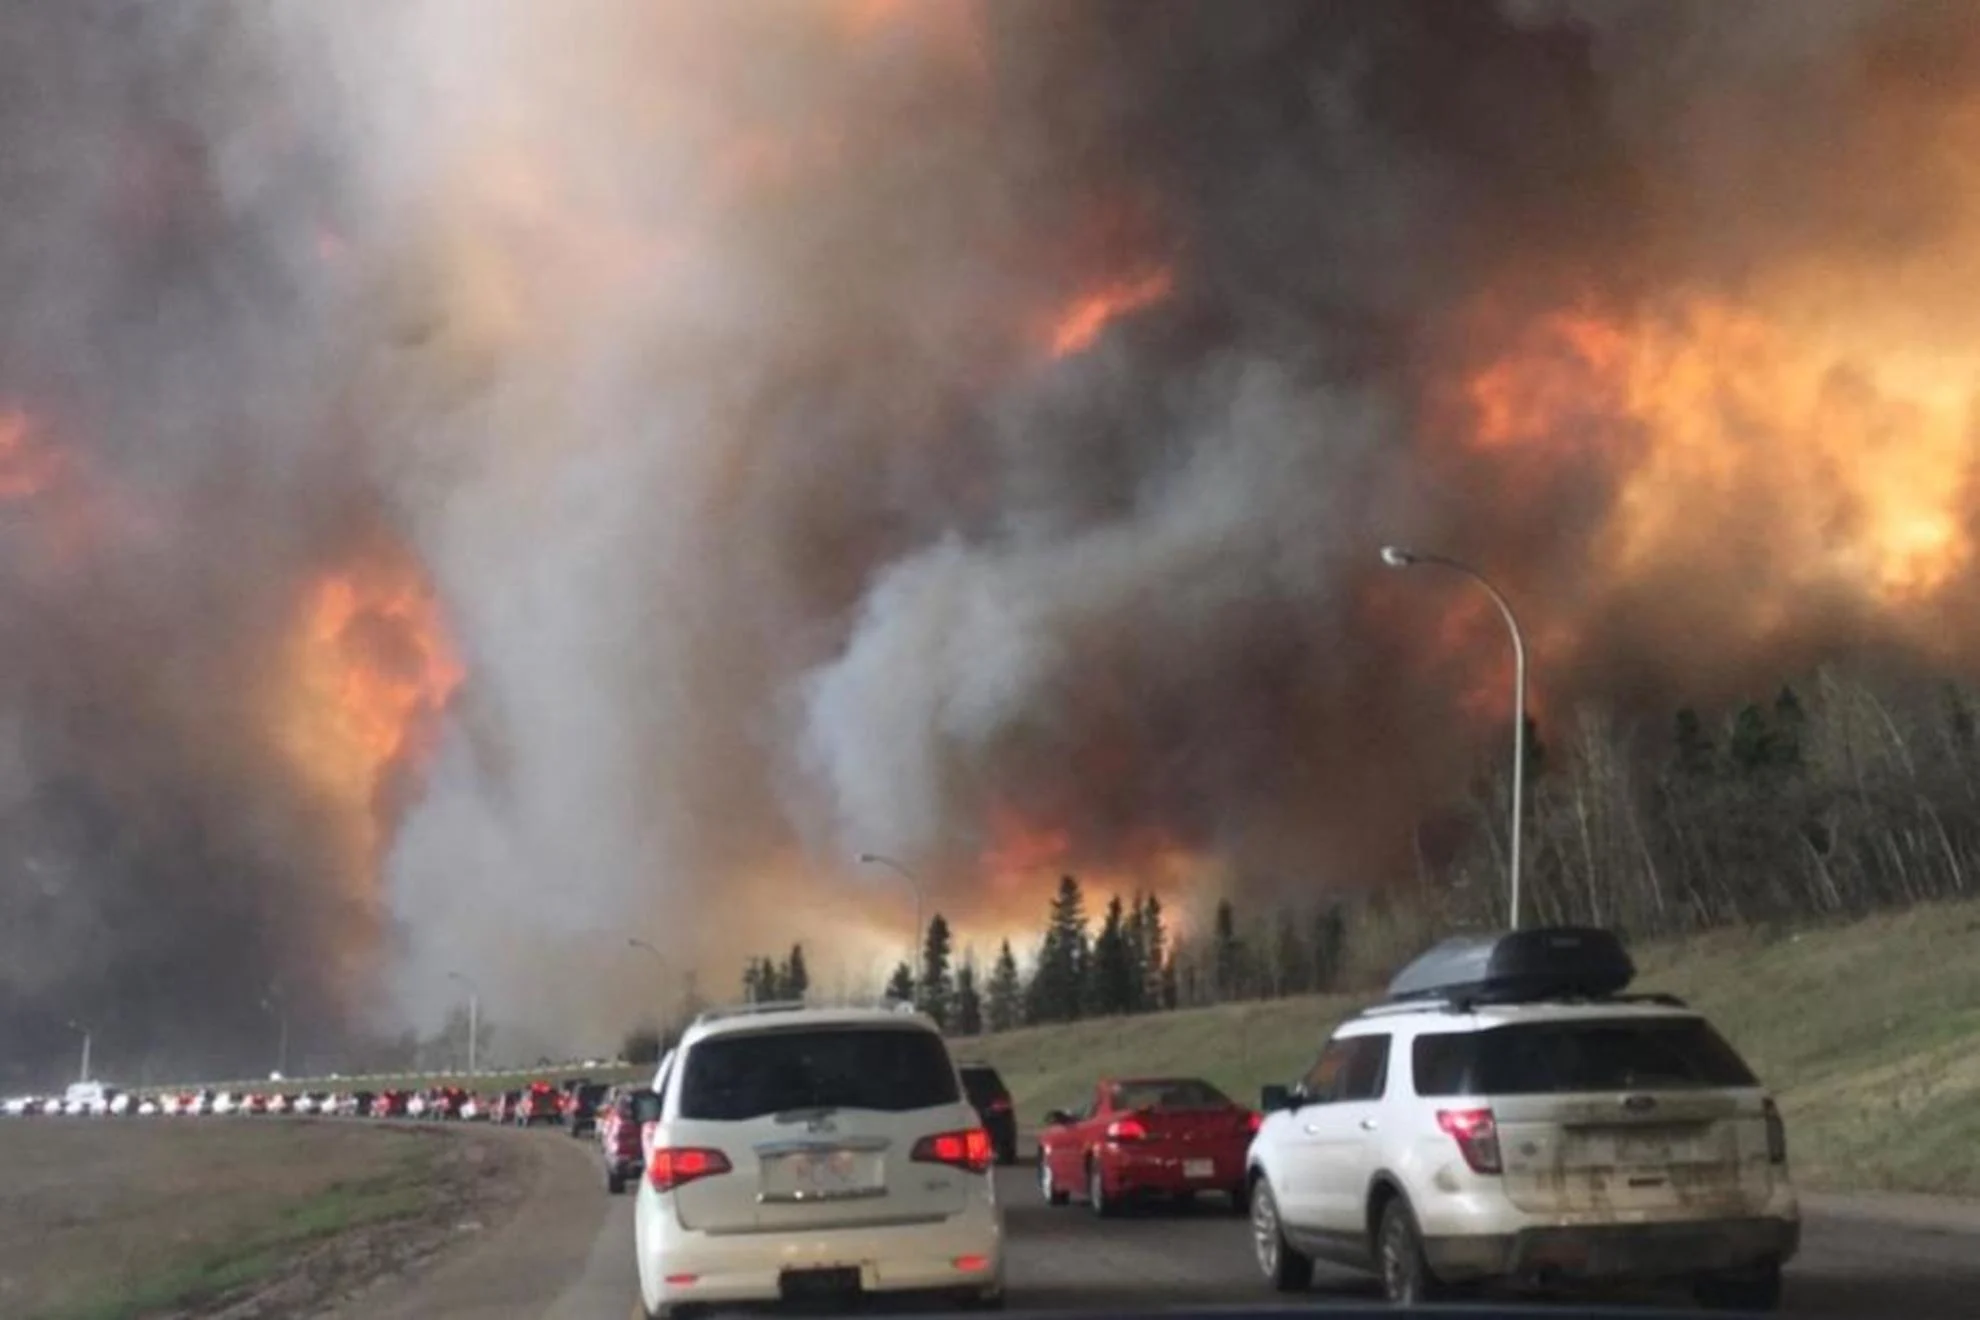 8 years ago today, 88,000 Albertans fled due to the Fort McMurray wildfire